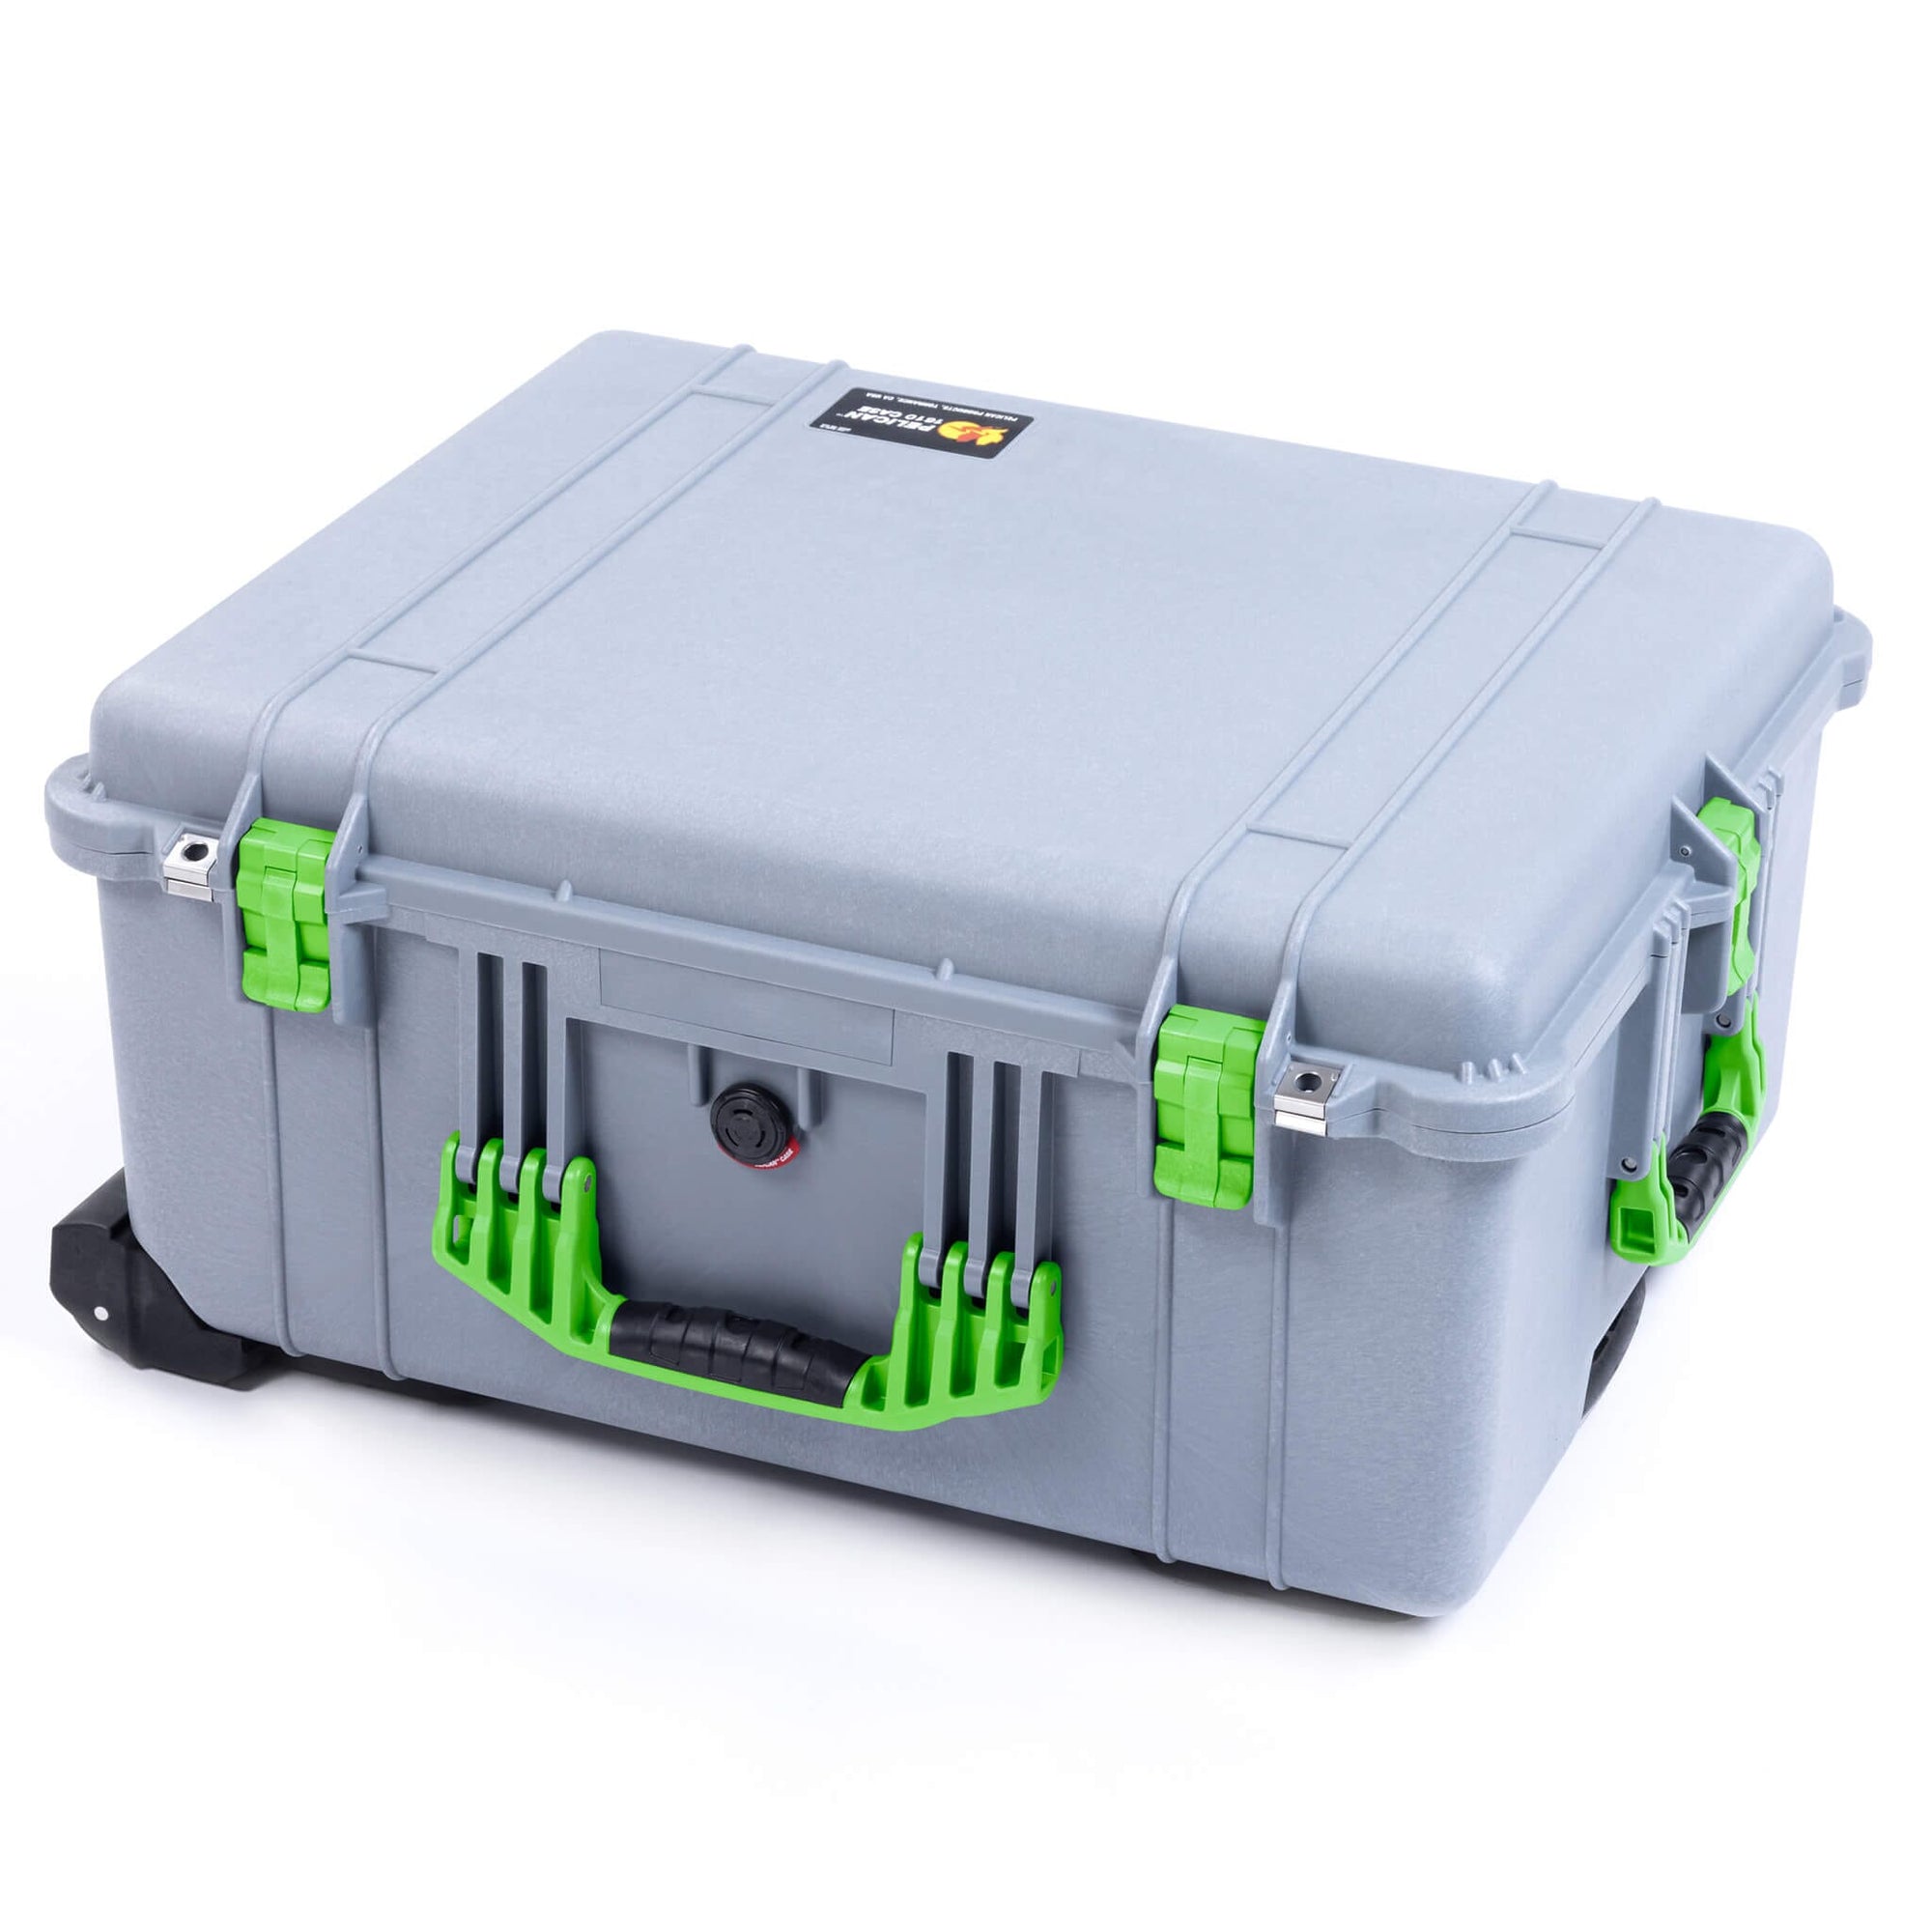 Pelican 1610 Case, Silver with Lime Green Handles and Latches